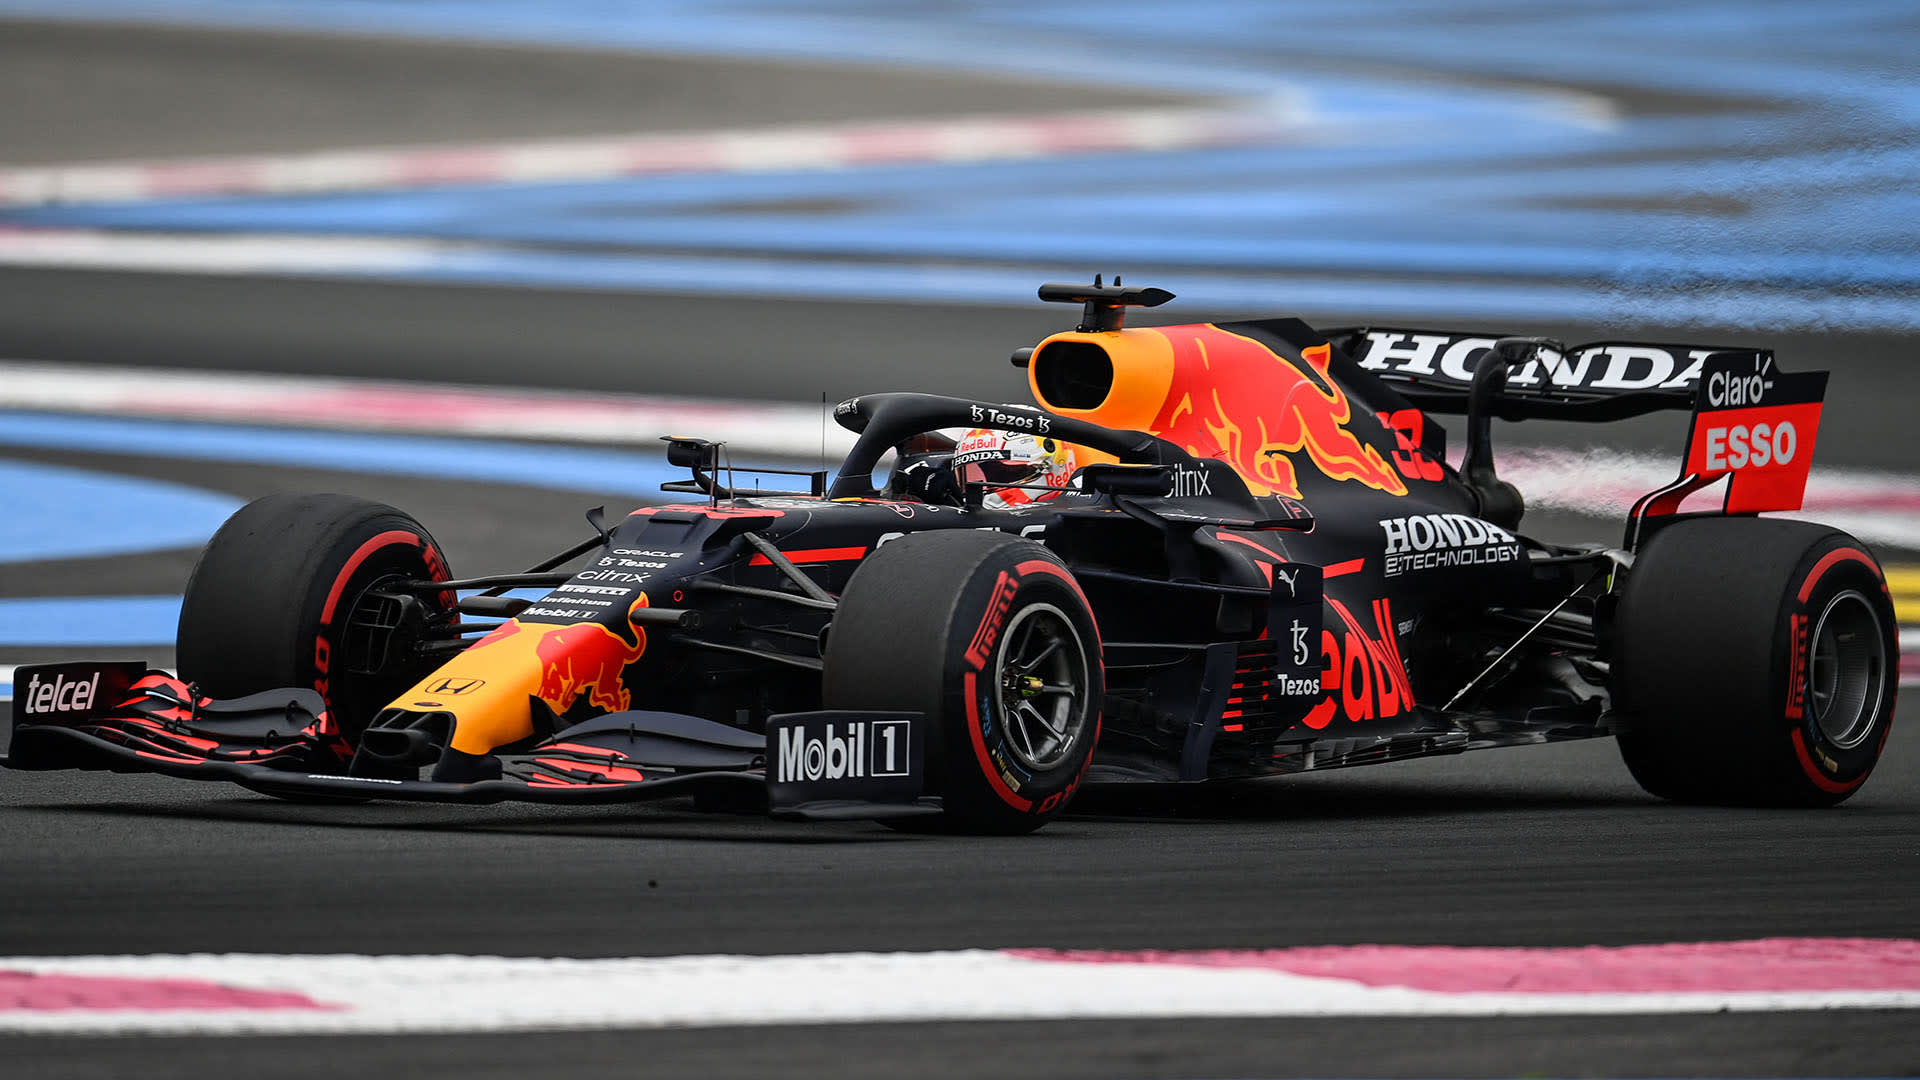 2021 French Grand Prix FP3 report and highlights Verstappen posts stunning lap to head final practice from Bottas and Sainz Formula 1®